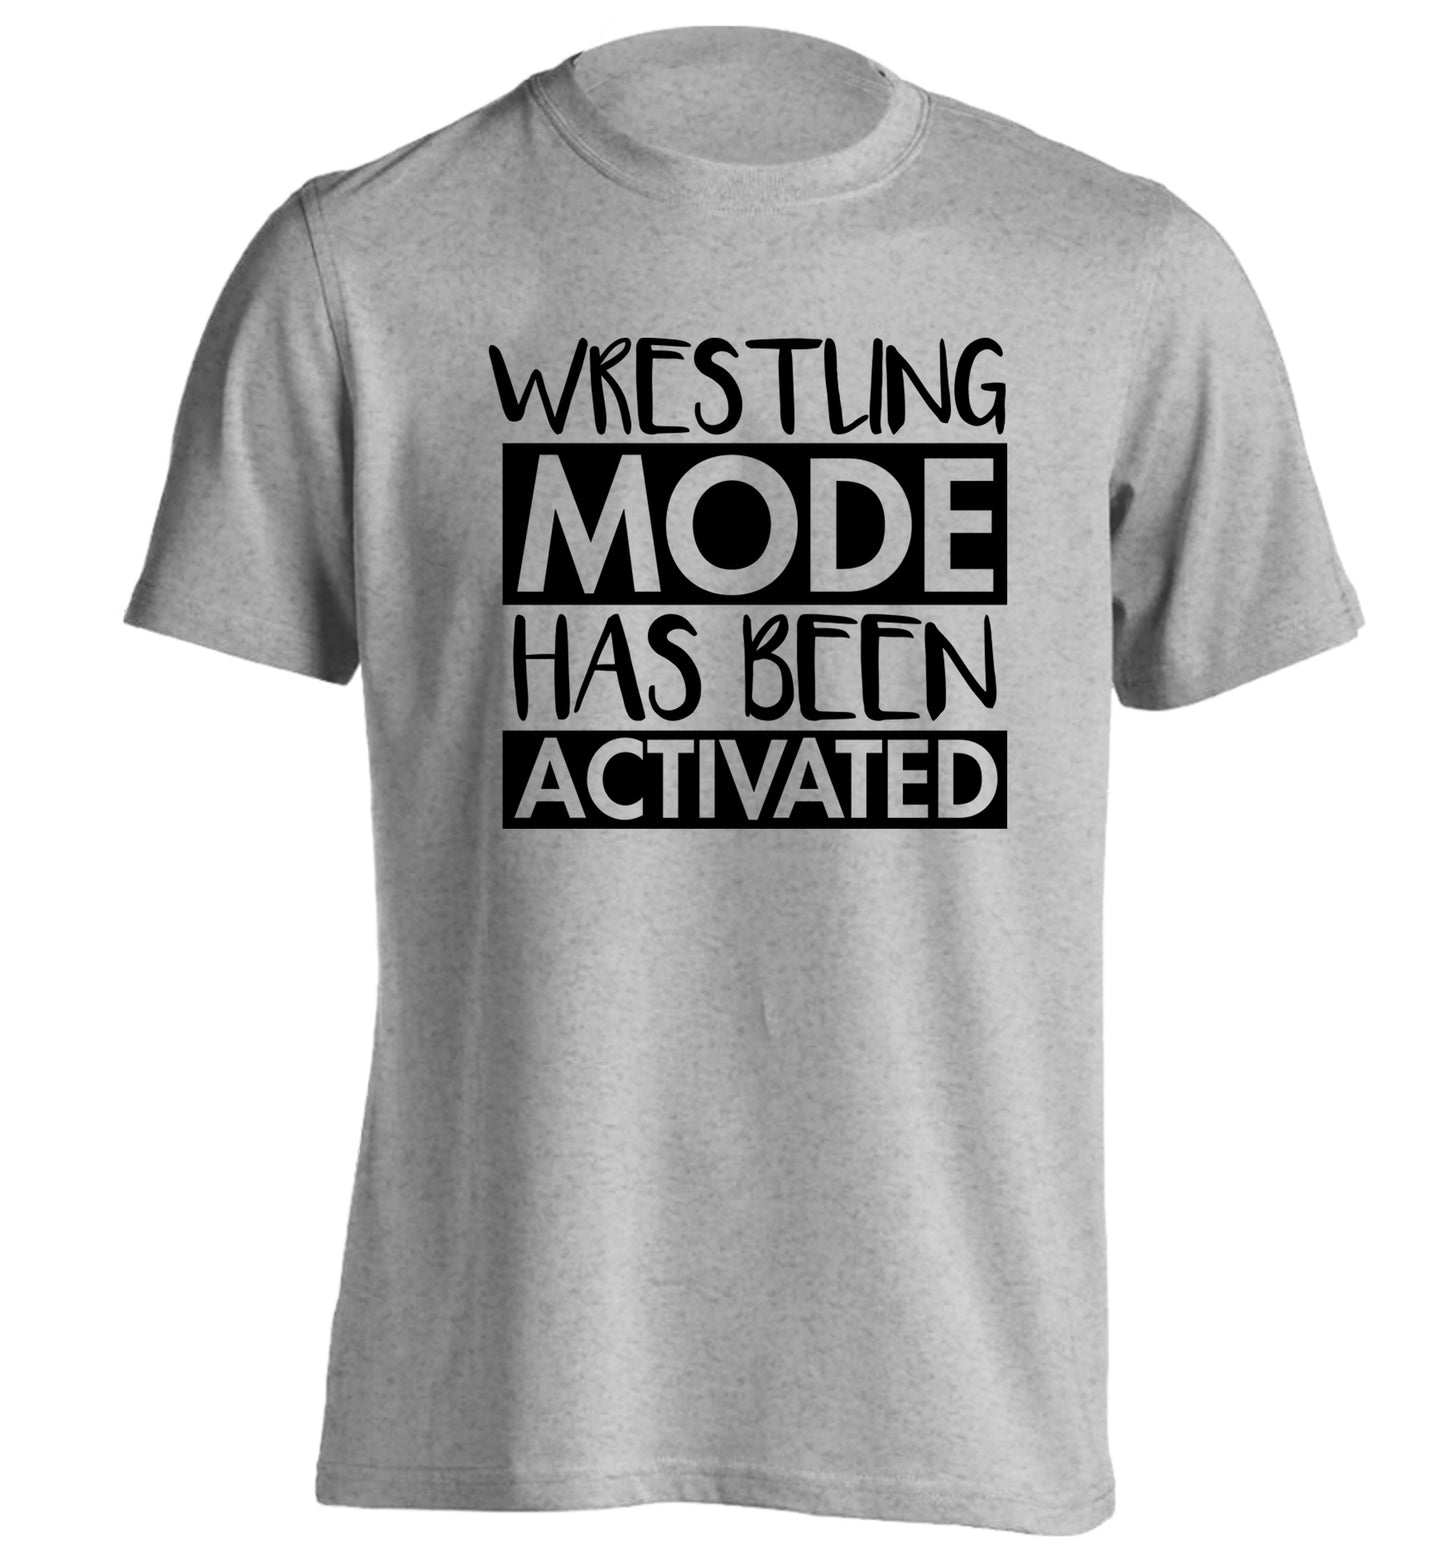 Wresting mode activated adults unisex grey Tshirt 2XL